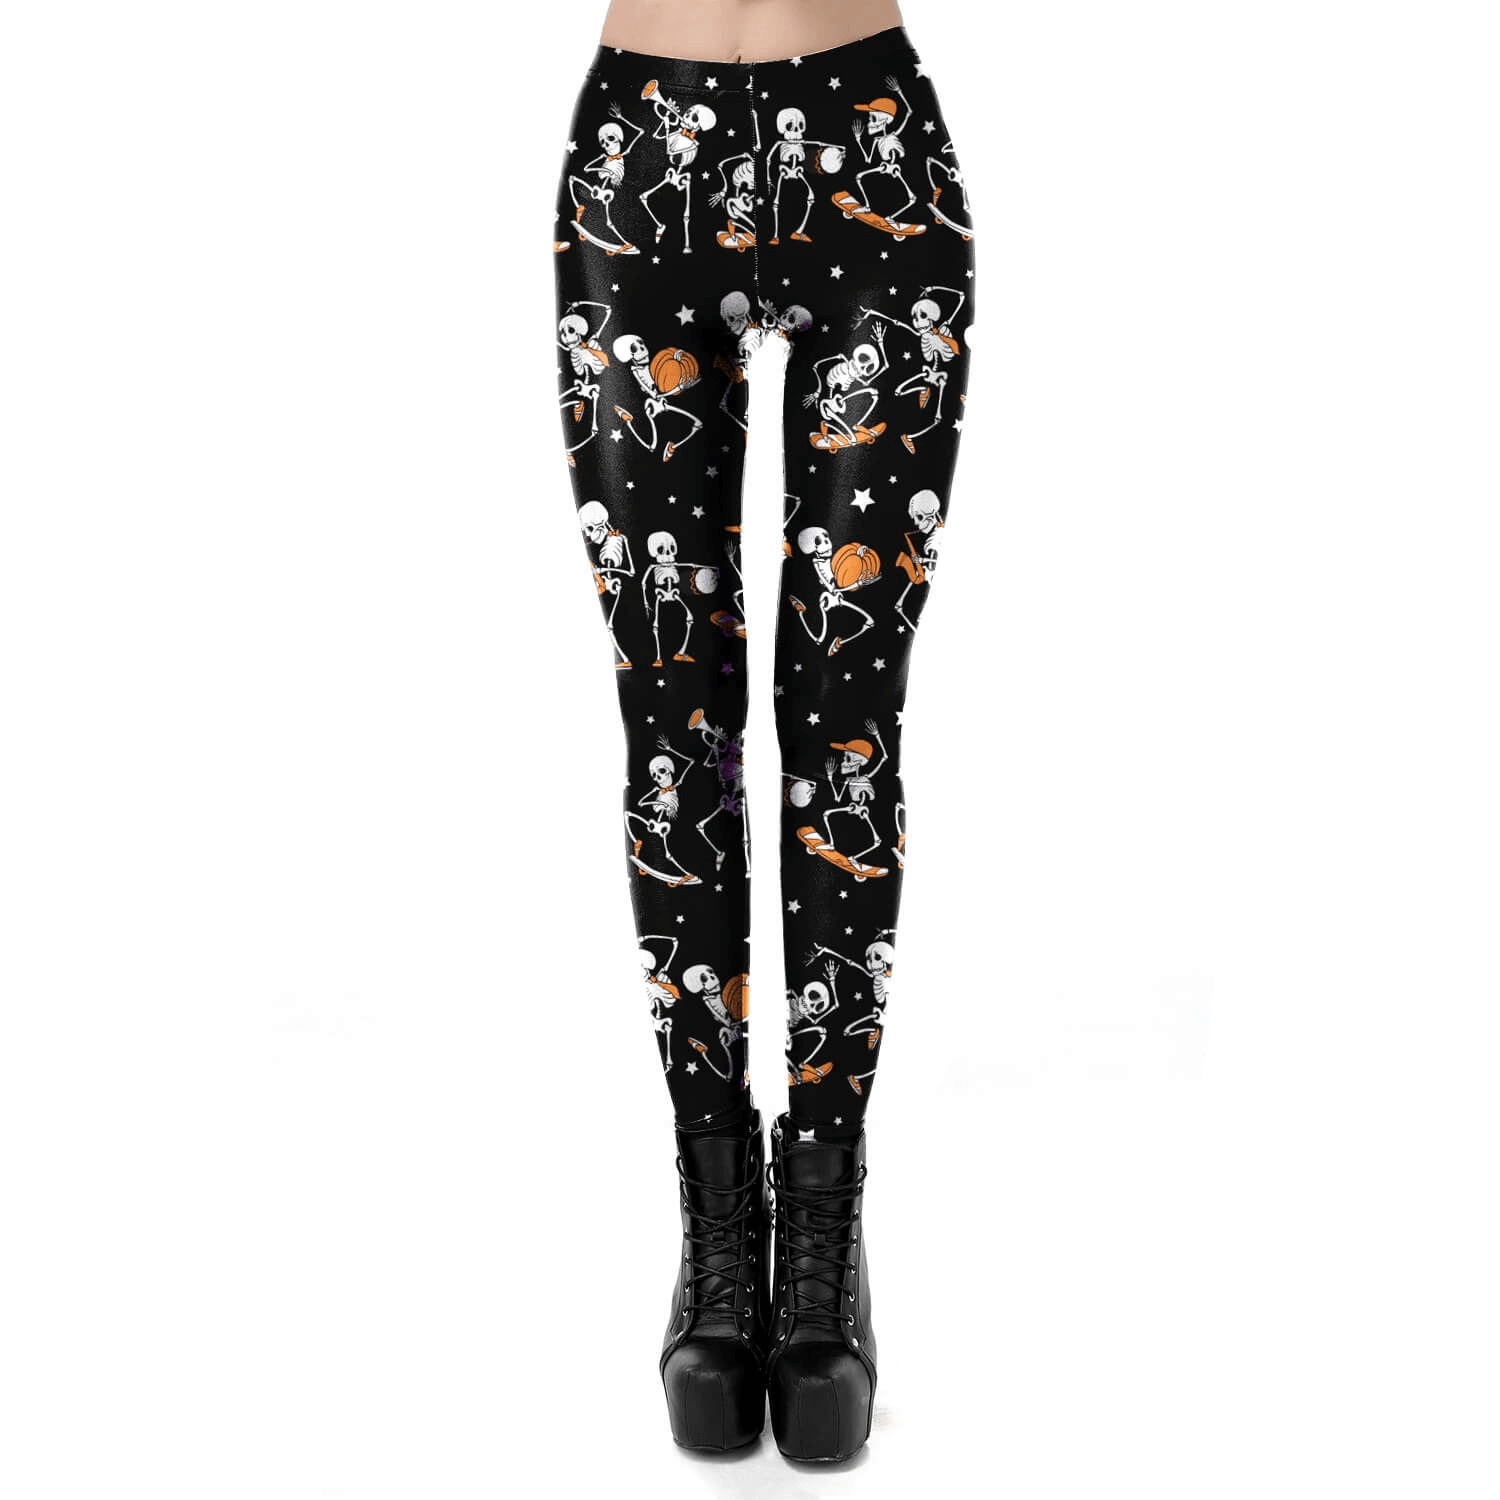 Black Classic Female Leggings with Skulls and Pumpkins for Halloween / Sexy Workout Pants for Women - HARD'N'HEAVY